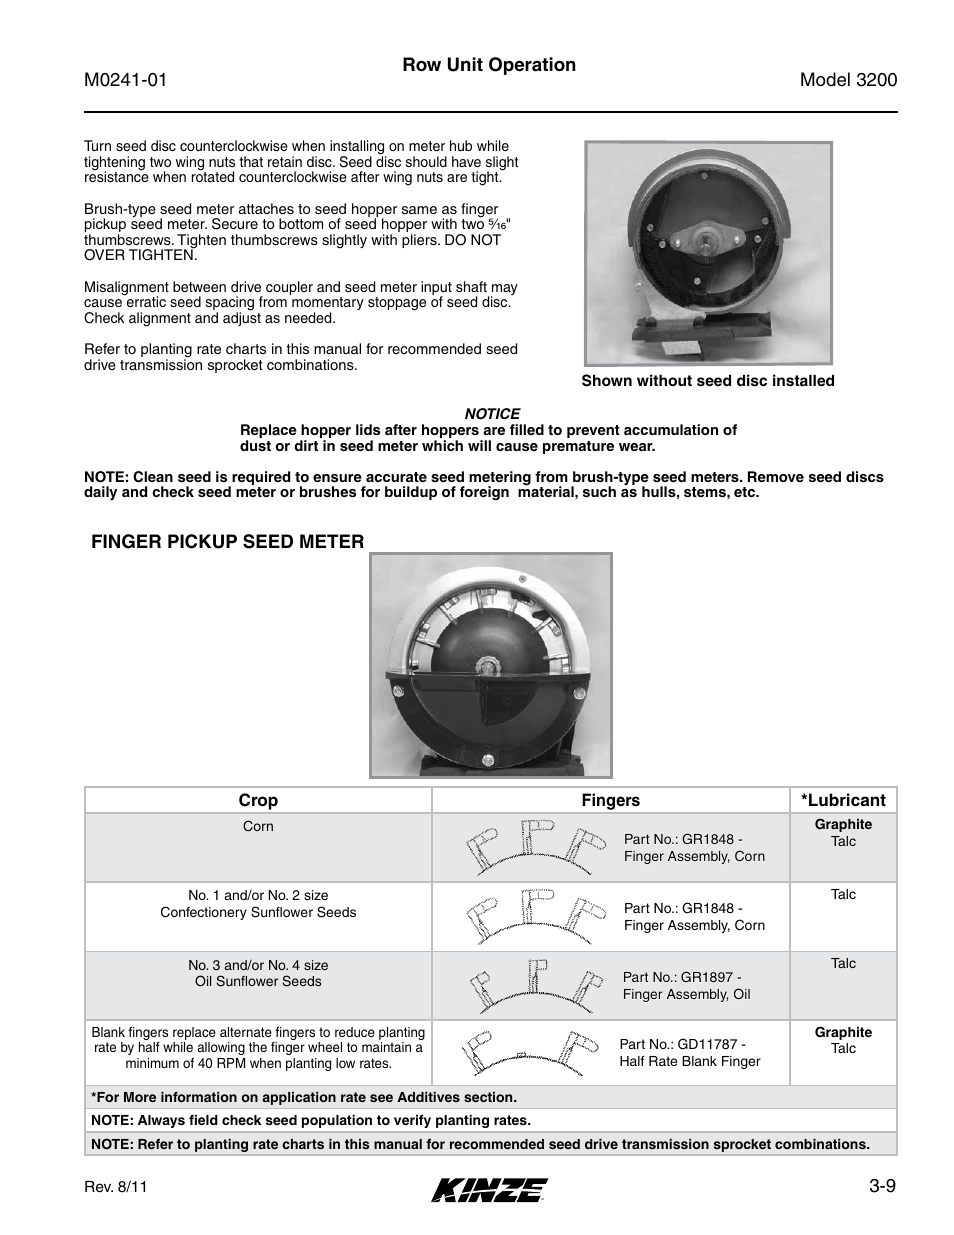 Finger pickup seed meter, Finger pickup seed meter -9, 9 row unit operation | Kinze 3200 Wing-Fold Planter Rev. 7/14 User Manual | Page 47 / 192